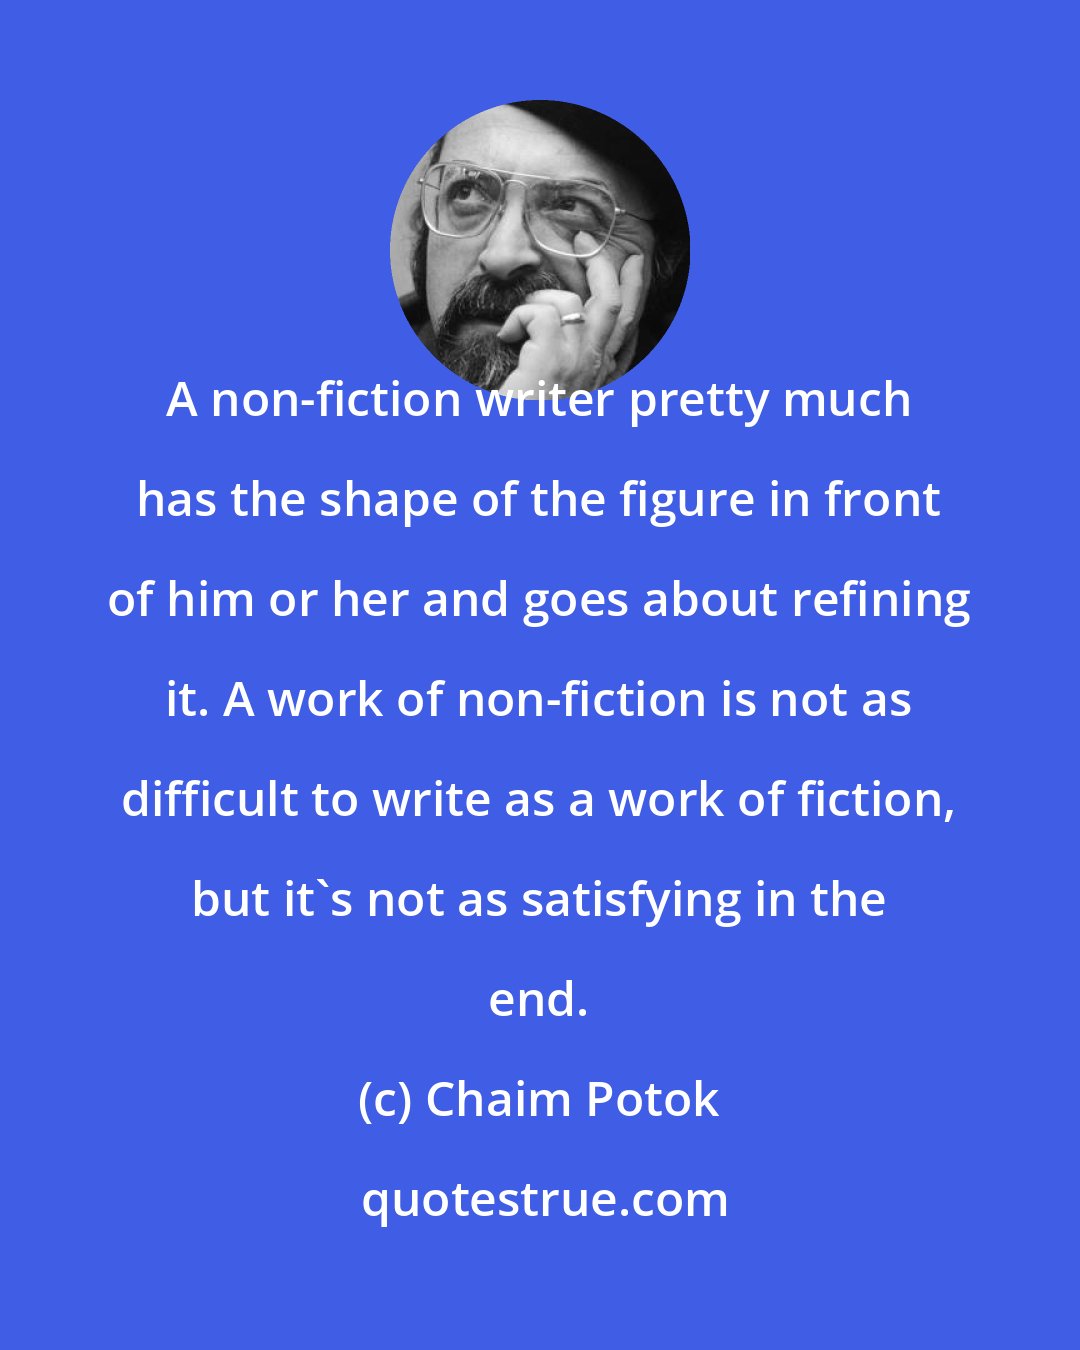 Chaim Potok: A non-fiction writer pretty much has the shape of the figure in front of him or her and goes about refining it. A work of non-fiction is not as difficult to write as a work of fiction, but it's not as satisfying in the end.